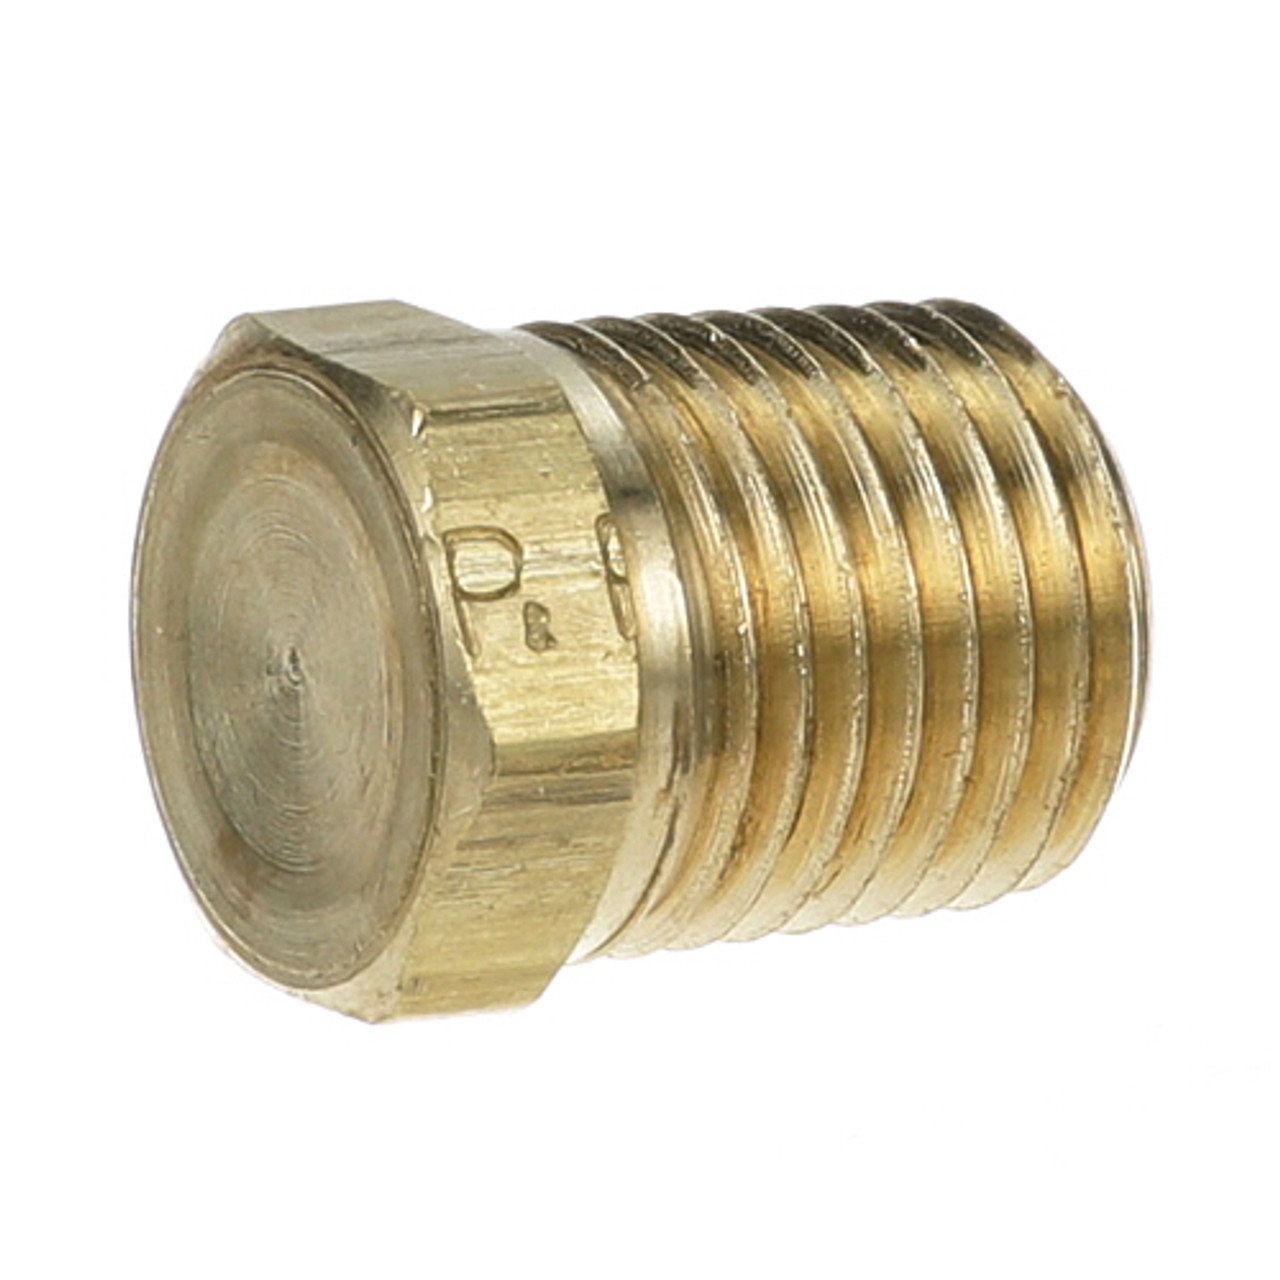 Plug 1/4 - Replacement Part For Royal Range 1519